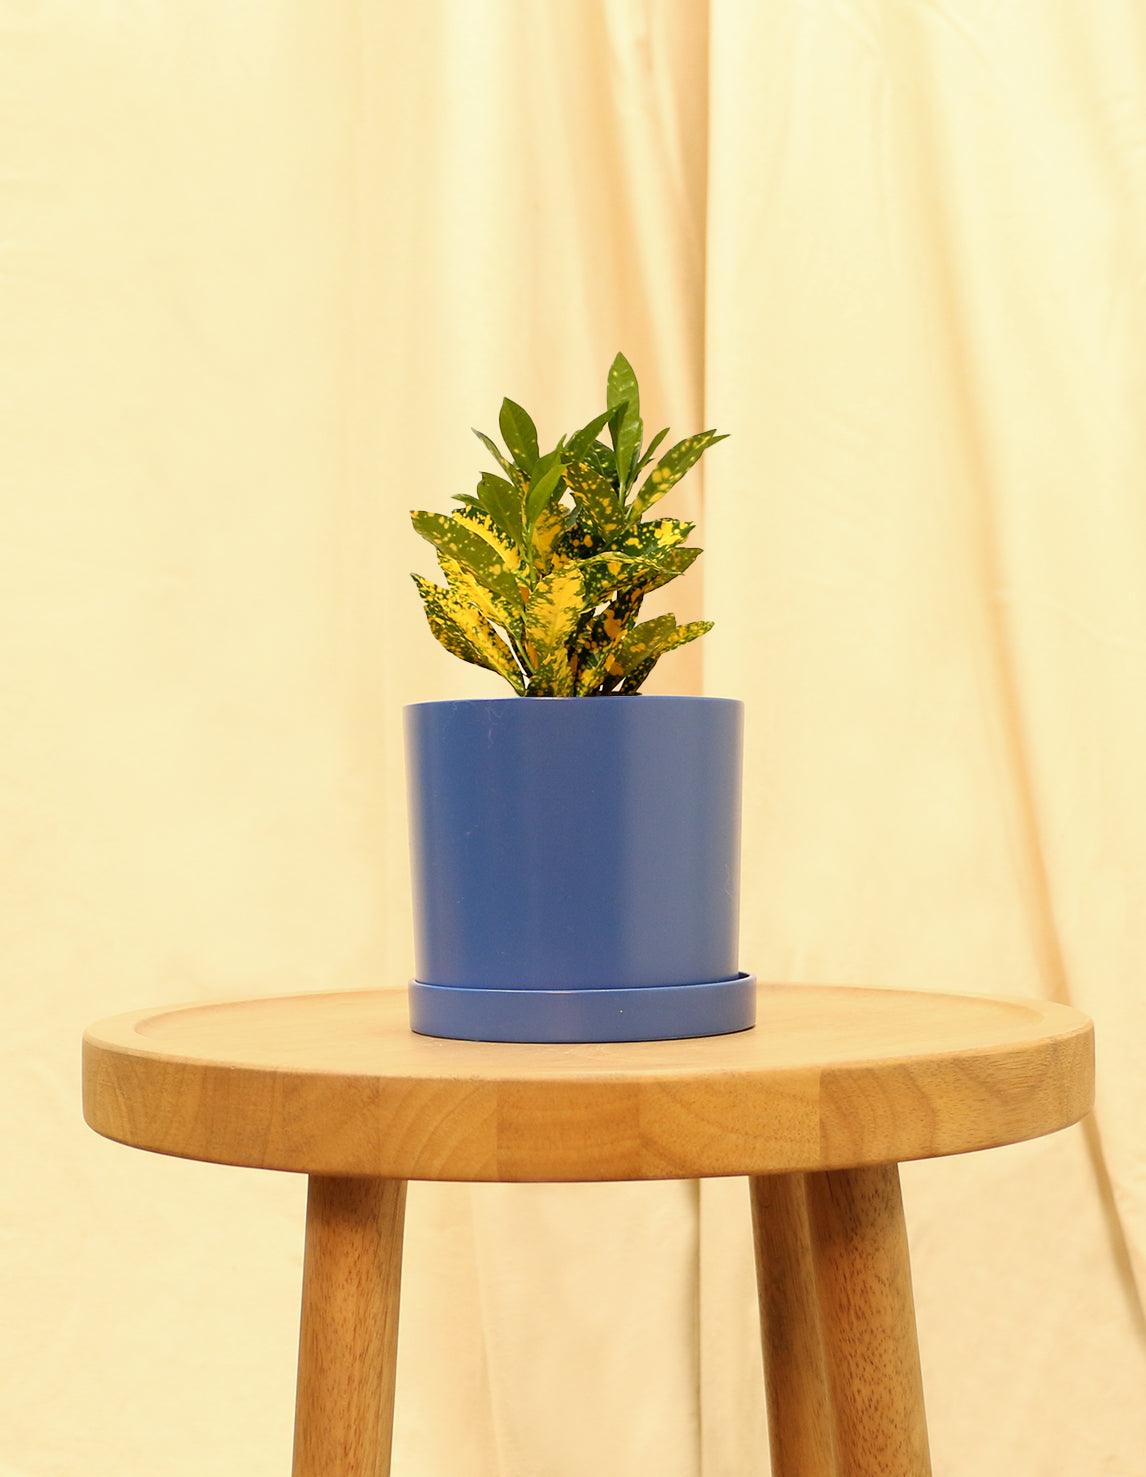 Small Japanese Laurel in blue pot.